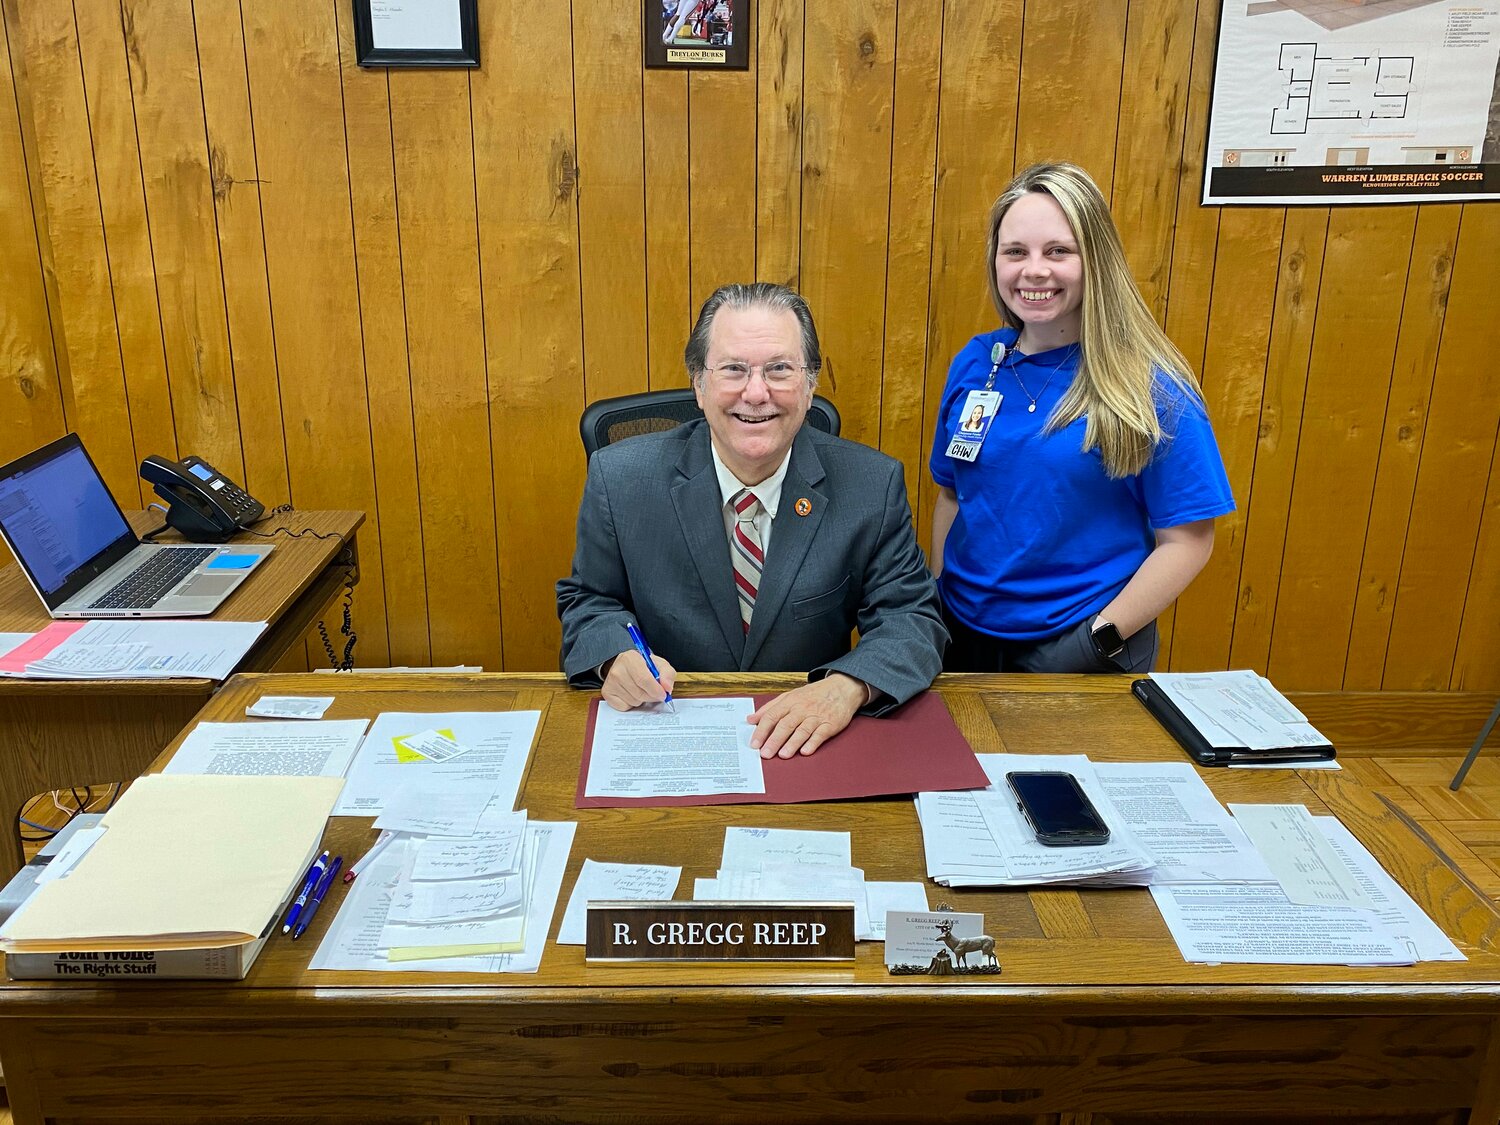 Mayor Gregg Reep signed a proclamation for Community Health Workers Awareness Week. Pictured: Mayor Reep and Cheyenne Fowler, from Mainline.